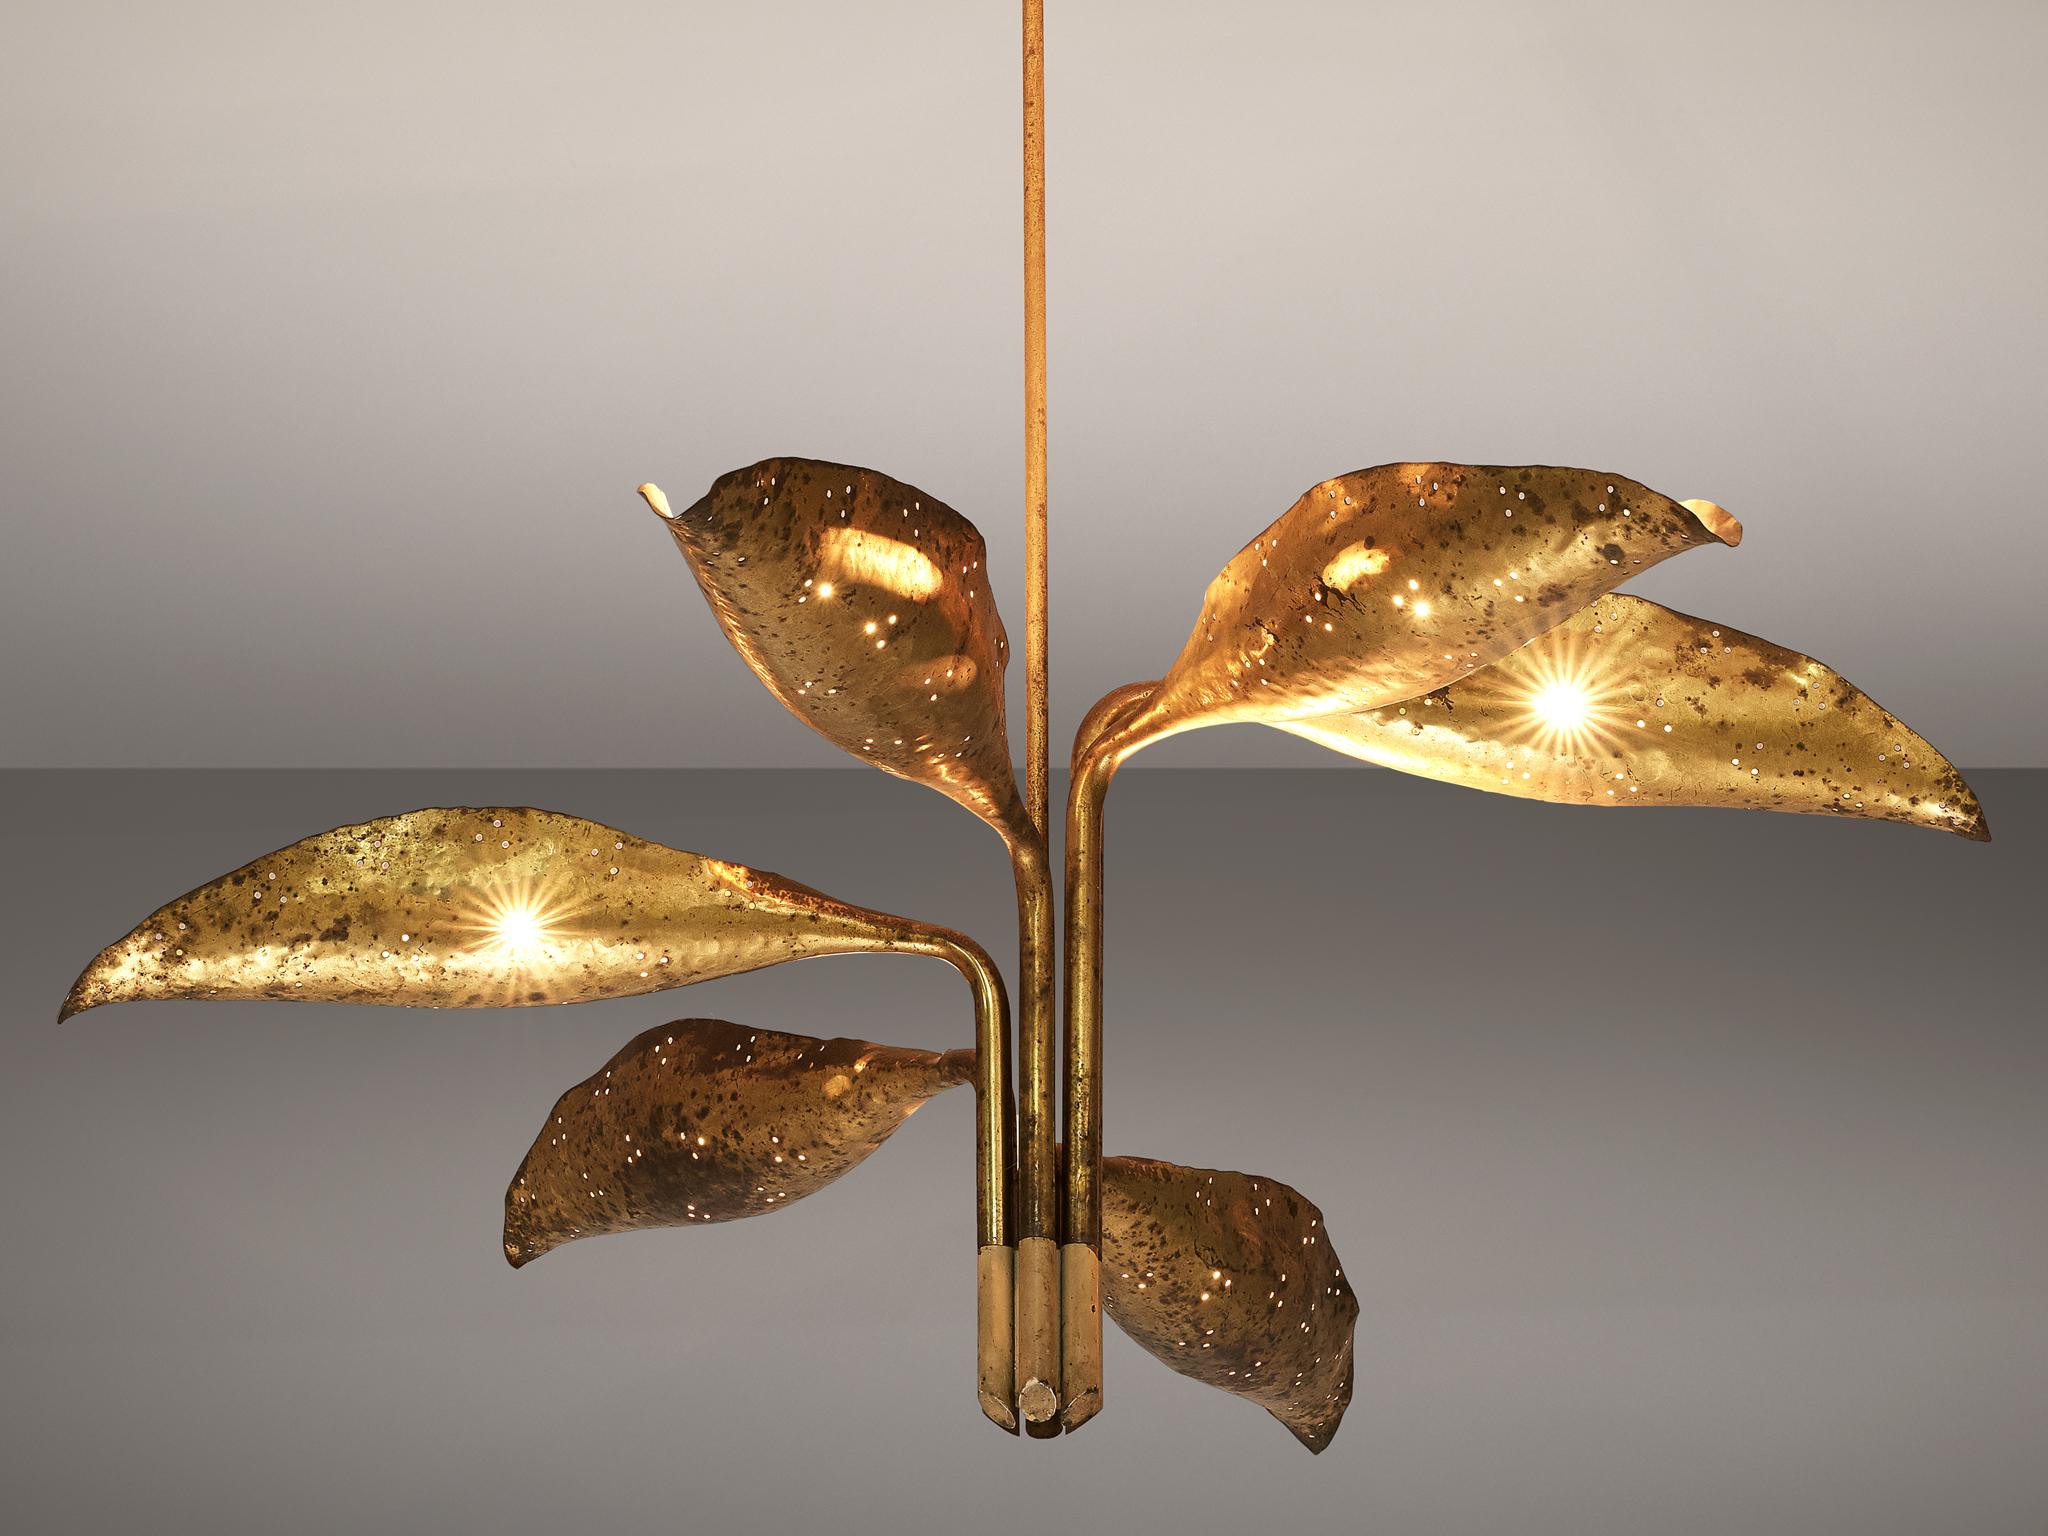 Angelo Lelii for Arredoluce, chandelier, brass and metal, Italy, 1950s.

This elegant and organic pendant with polished brass hand-hammered leafs is designed by Angelo Lelli. The chandelier consists of a brass shaft from which six brass leaves